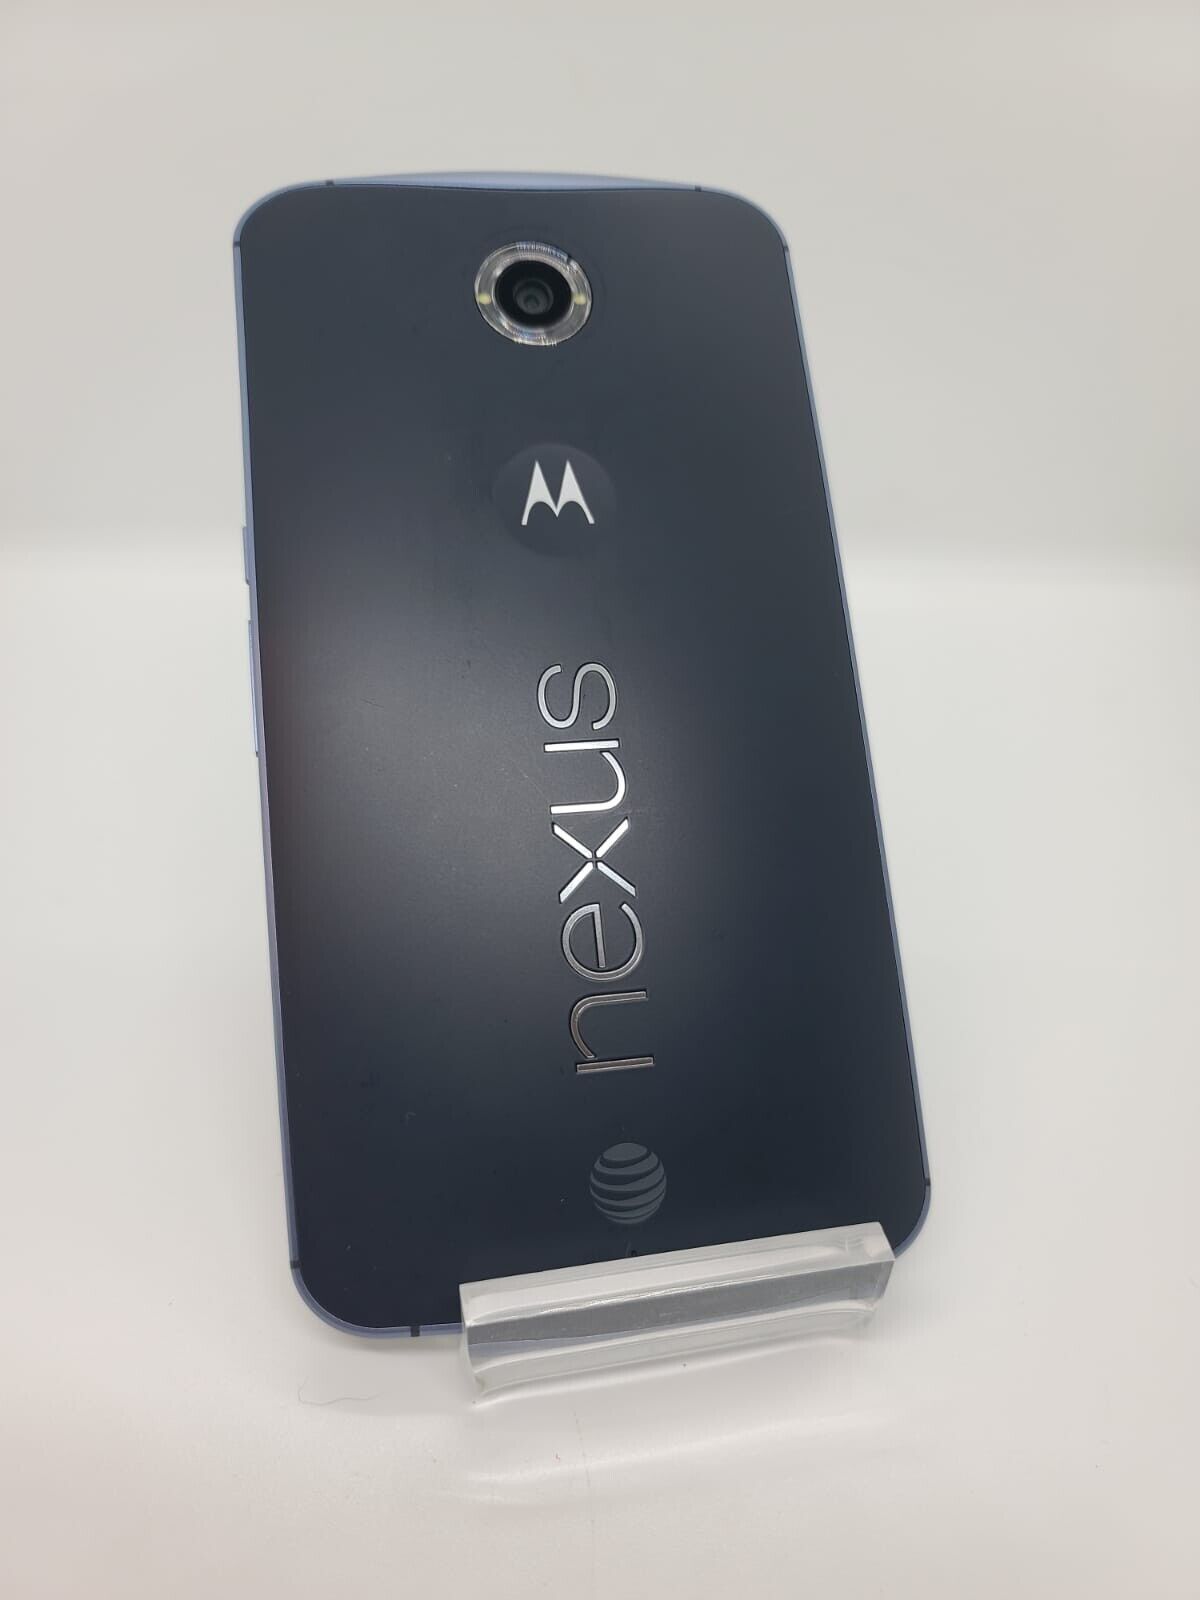 Motorola Nexus 6 32GB Blue AT&T 4G LTE Android Smartphone FOR PARTS WORKING